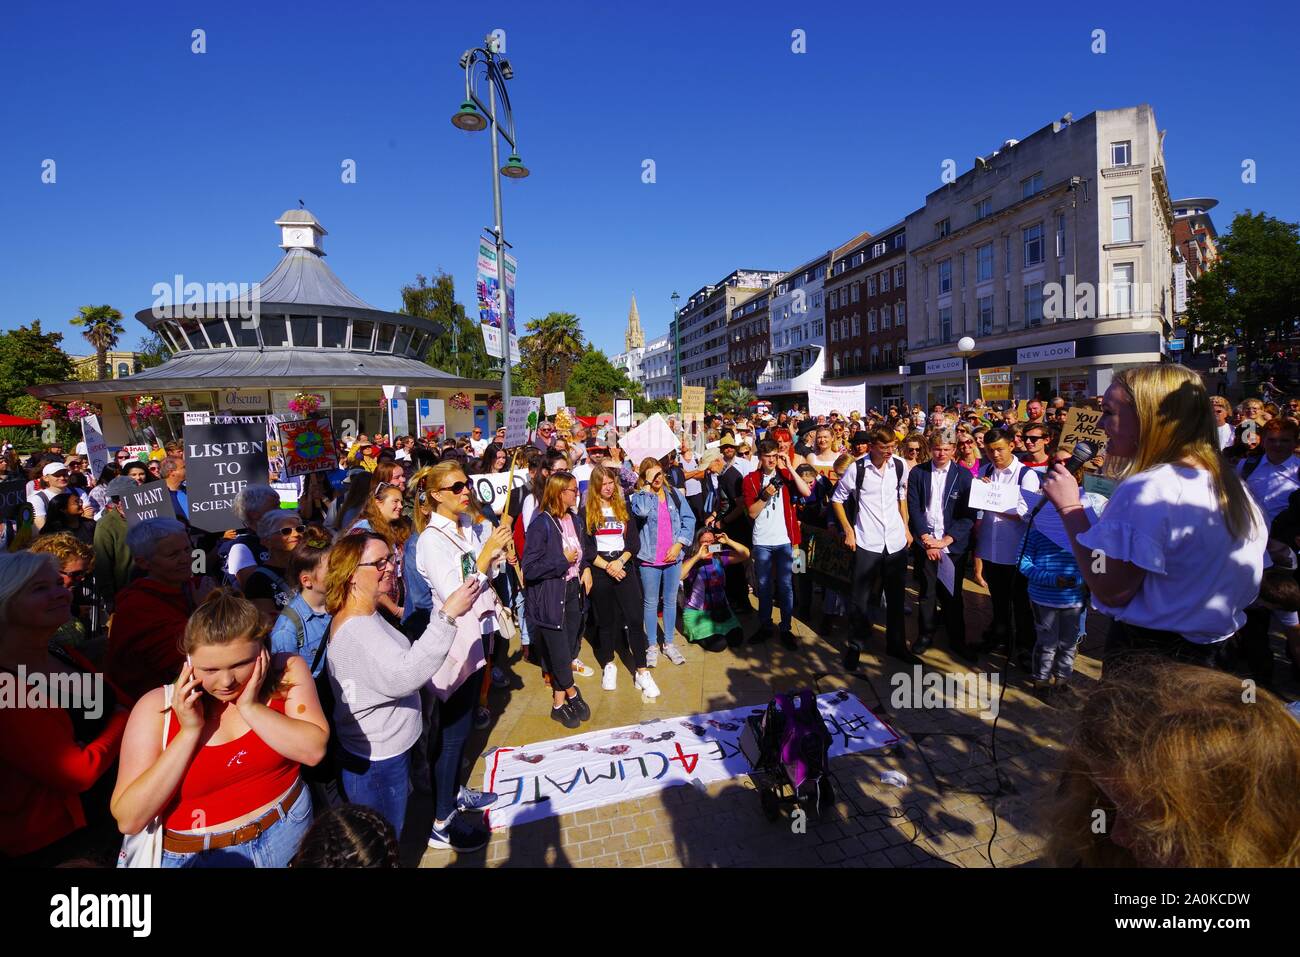 Hundreds in Bournemouth joined in the Global Climate Strike 20TH September 2019. With a gathering in Bournemouth Square a call  was made for action on stopping the effects of Climate Change.  The Global Strike was on an international scale. Stock Photo